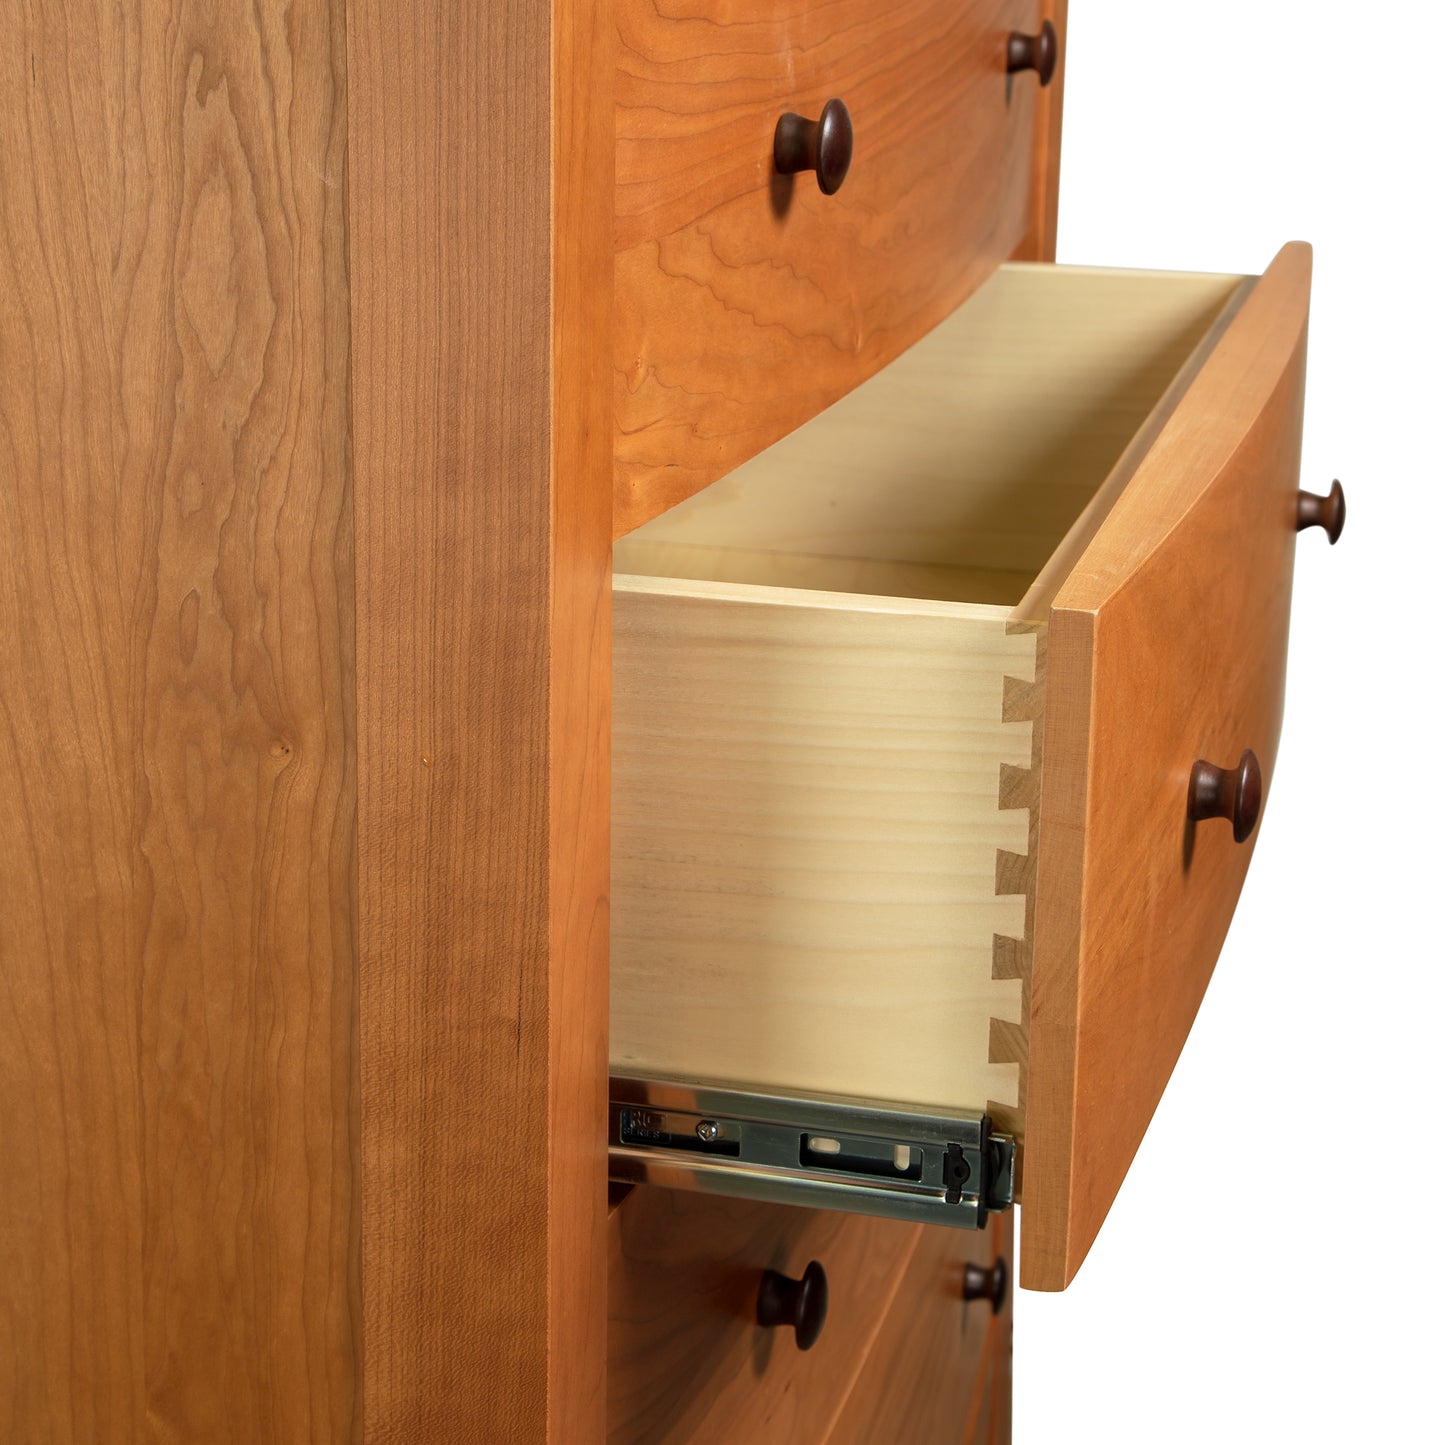 A drawer is open in a wooden chest of drawers.